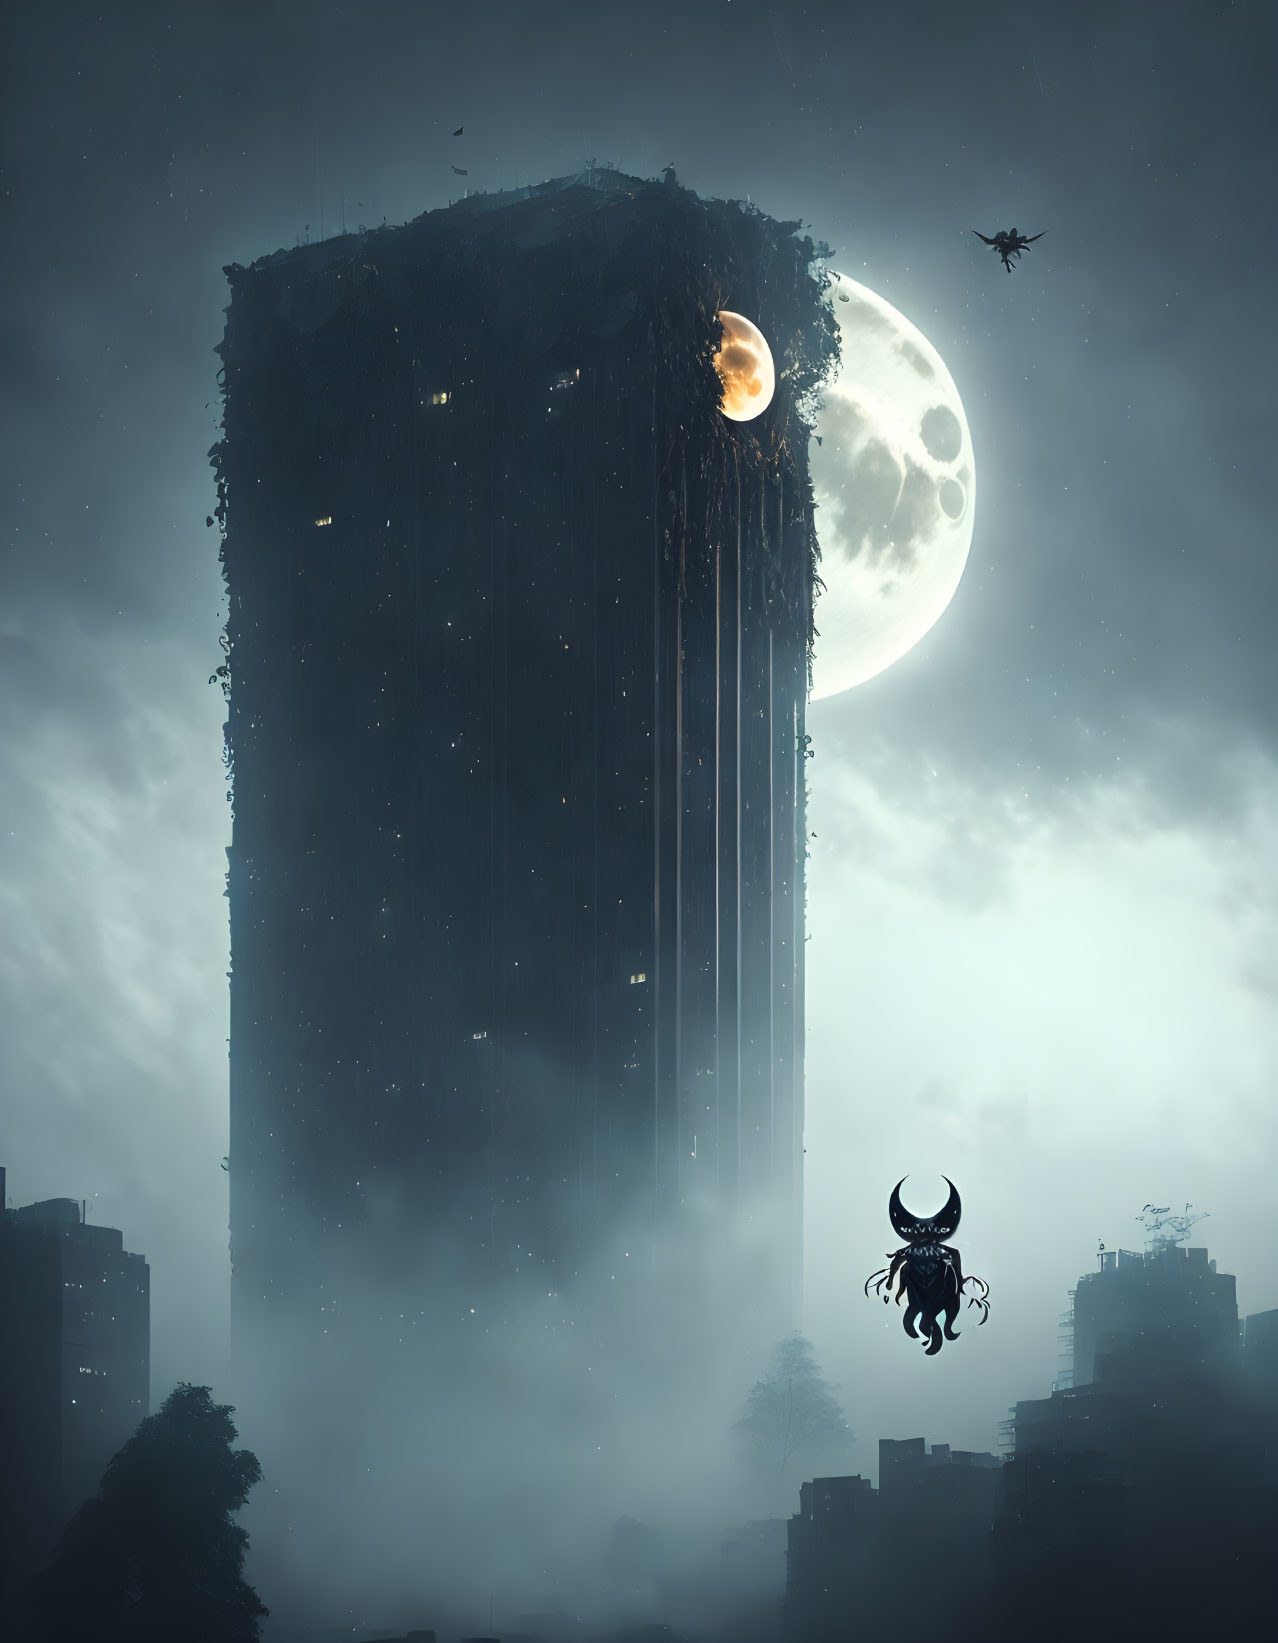 Misty cityscape with towering vine-covered building and helicopter under full moon